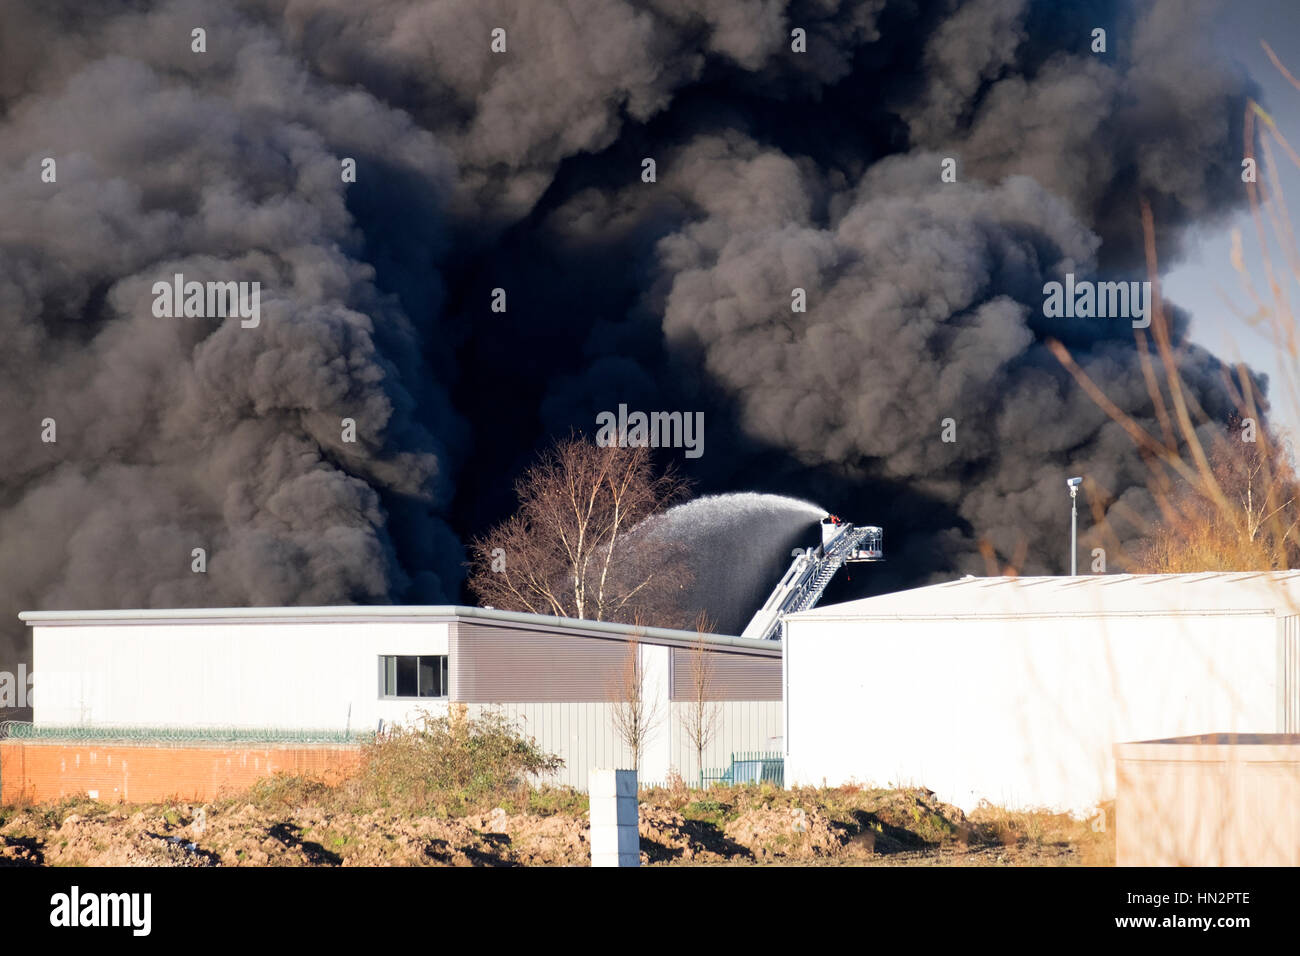 Large factory fire with plumes of thick black smoke Stock Photo